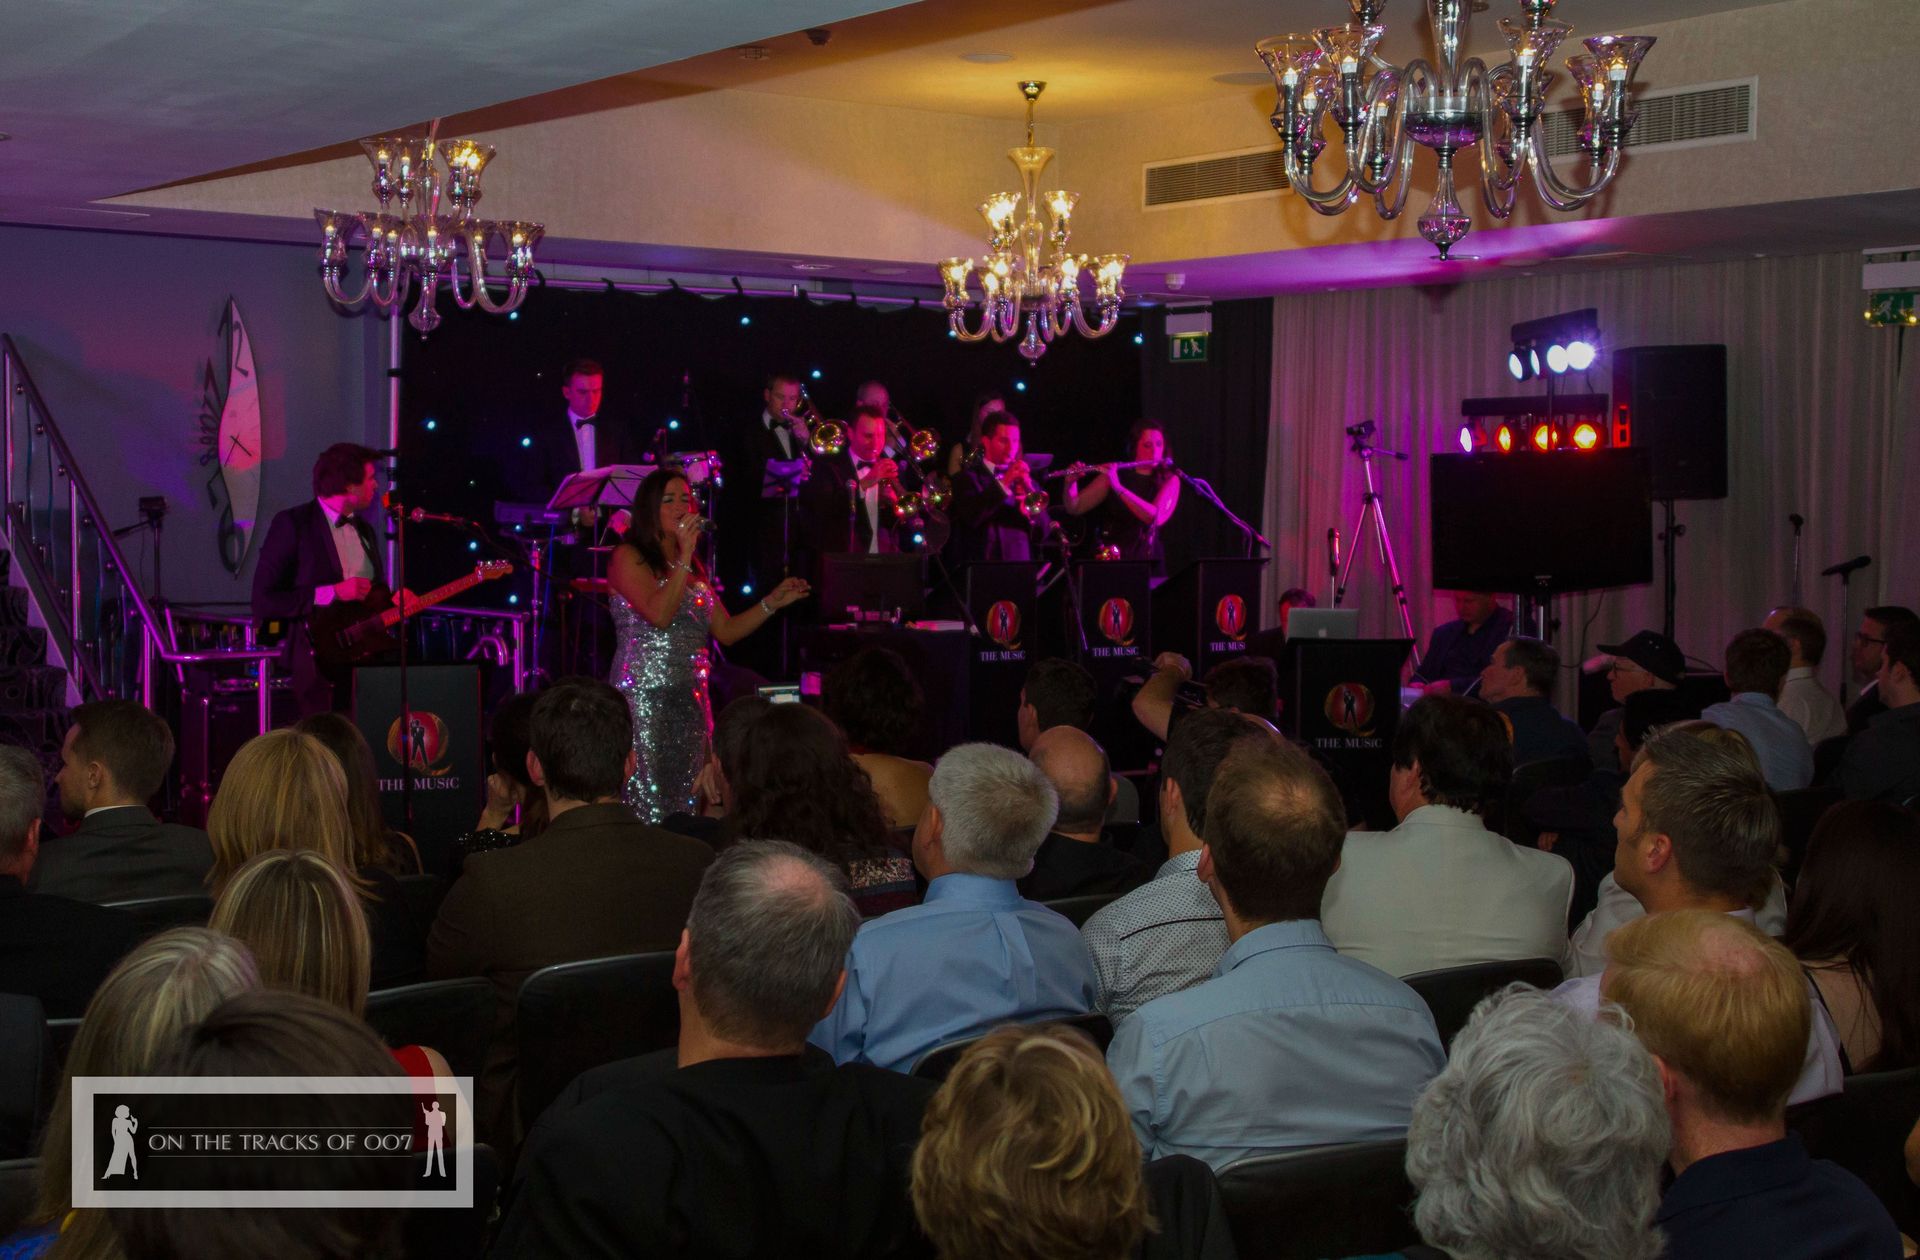 20th anniversary party at the Pinewood Hotel, featuring Q The Music live! (photo by Sascha Braun)